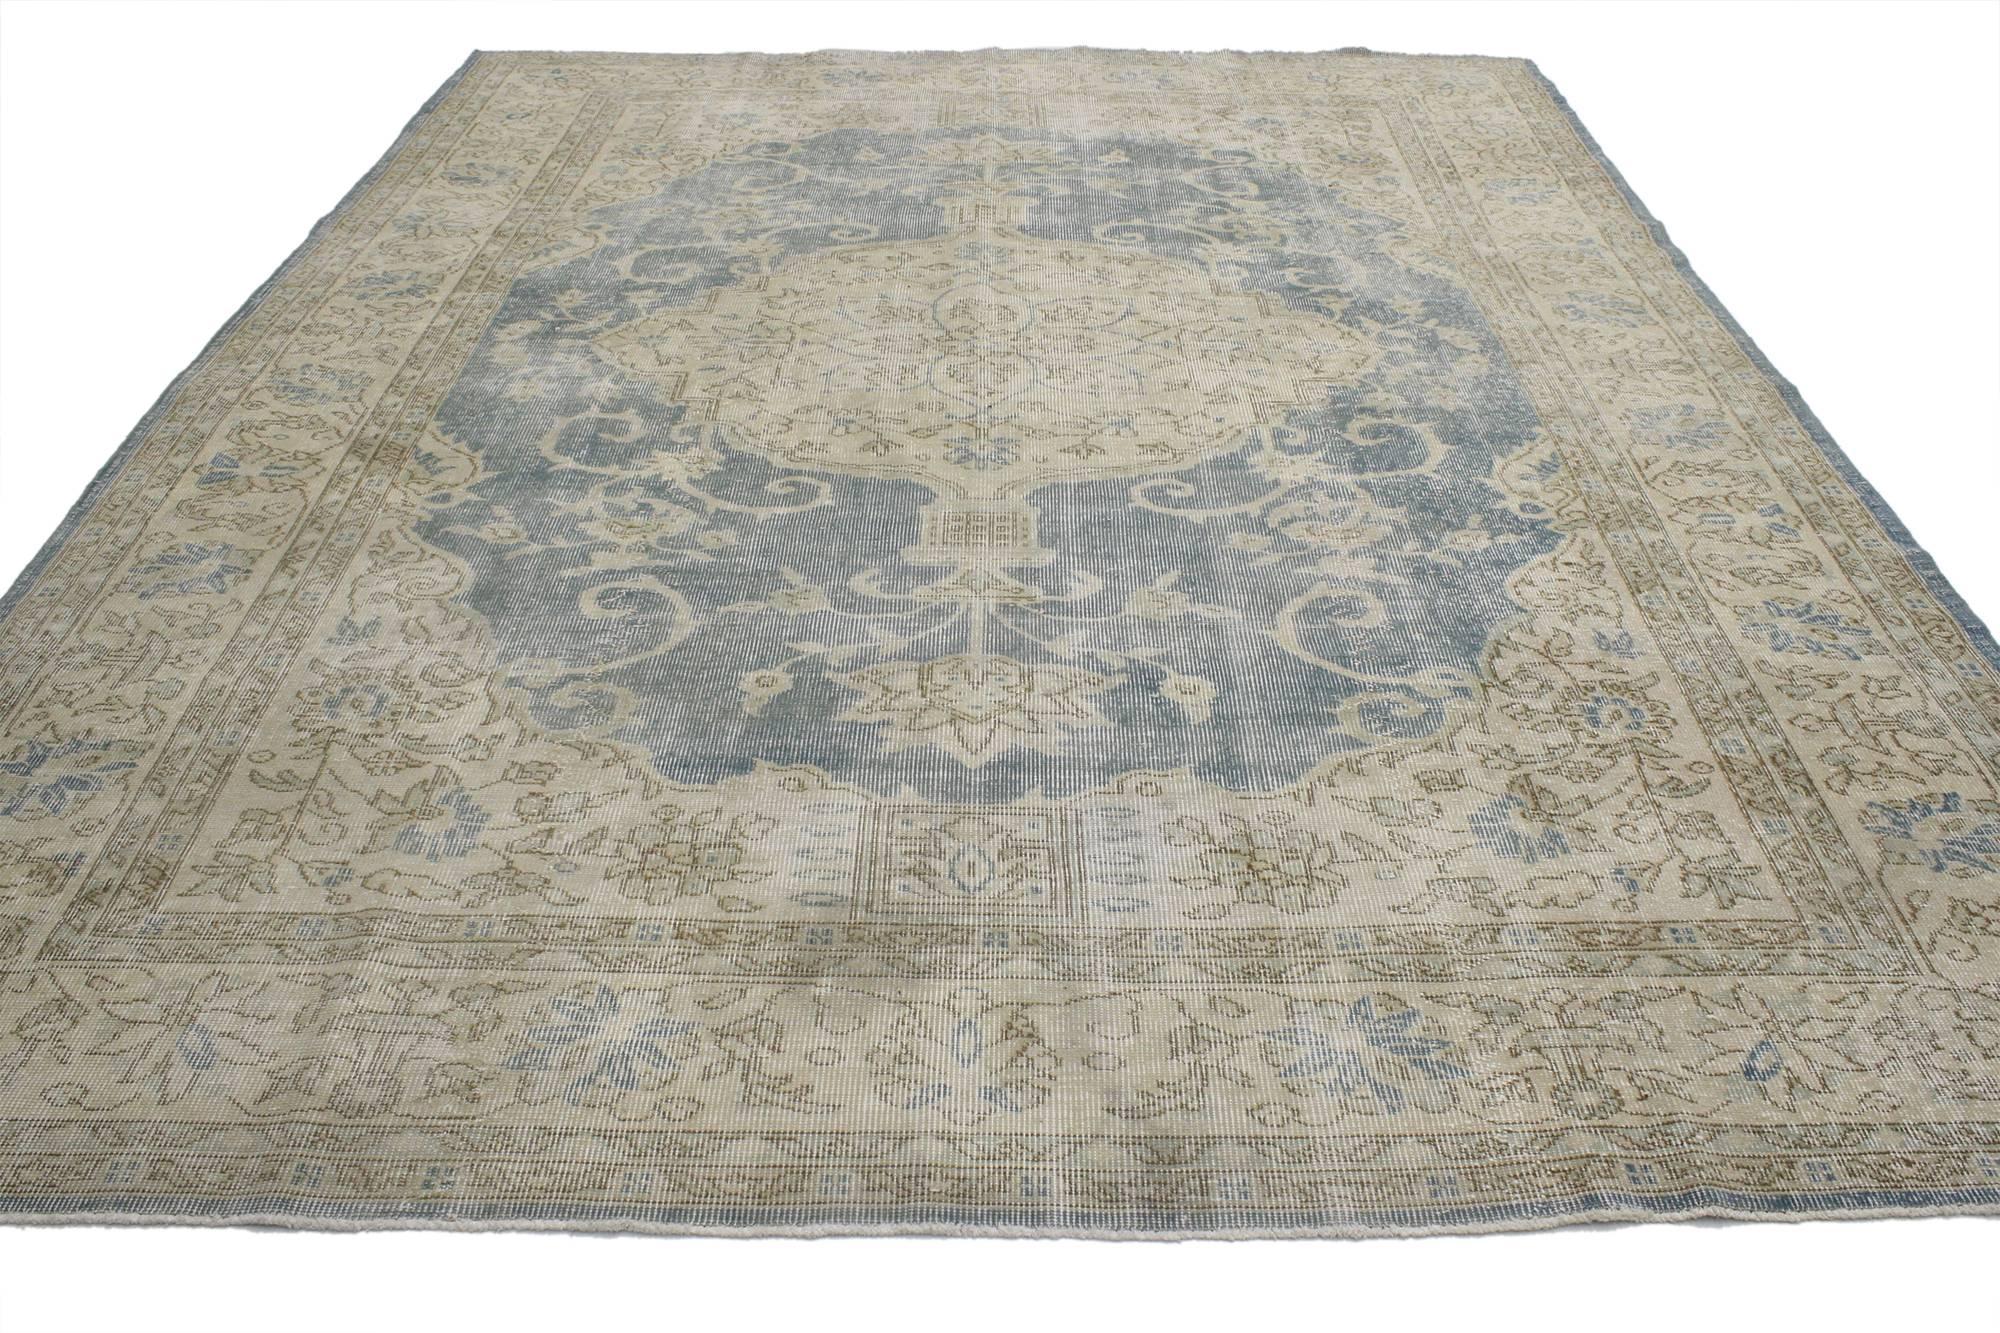 52032, distressed Sivas rug with shabby chic farmhouse style. This distressed vintage Turkish Sivas rug with a Shabby Chic Farmhouse style can make nearly any space feel warm and welcoming. The Turkish Sivas rug showcases a grand medallion filled